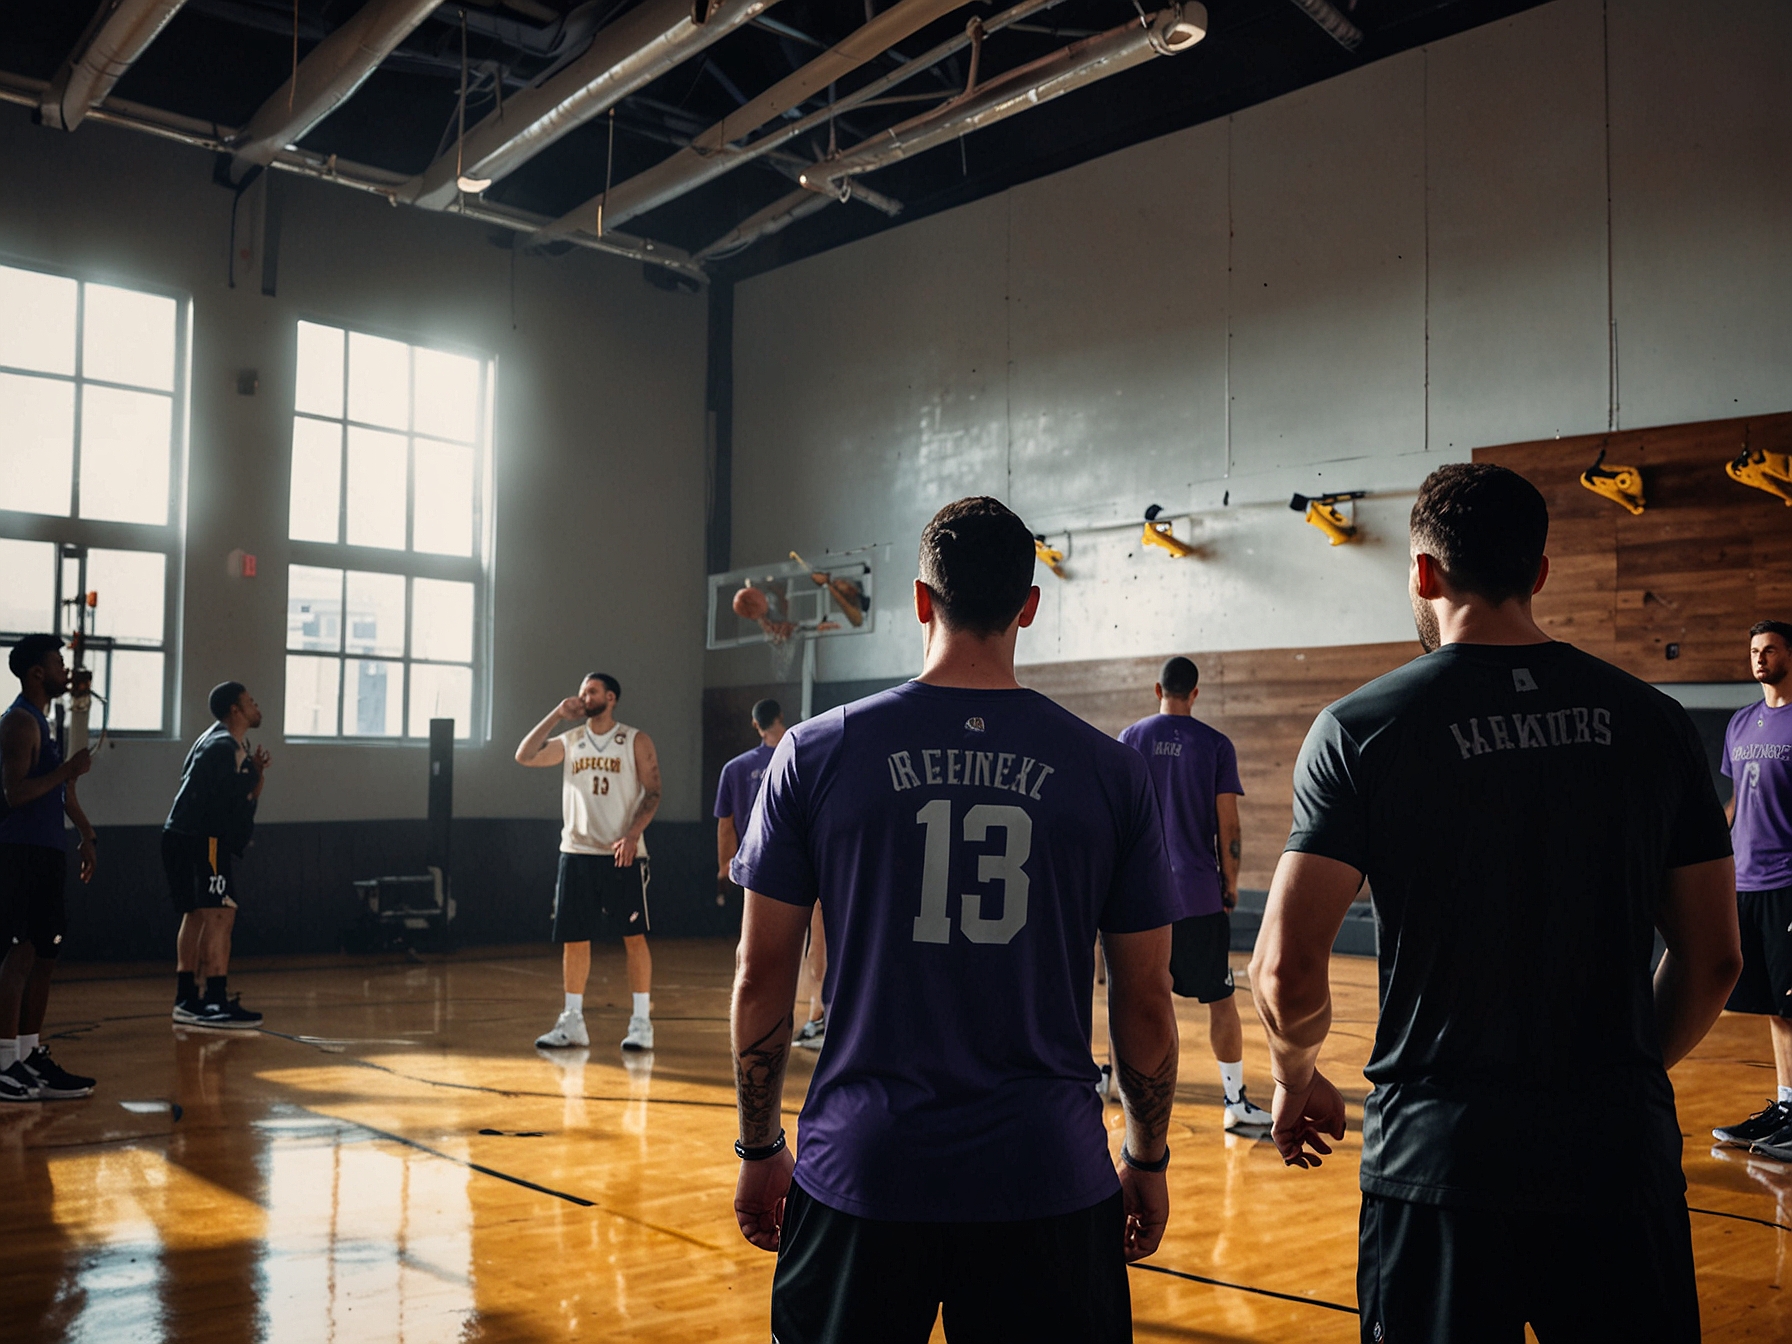 Los Angeles Lakers team members gather during a practice session under the watchful eye of their new head coach, JJ Redick. The image captures the beginning of a new era for the team.